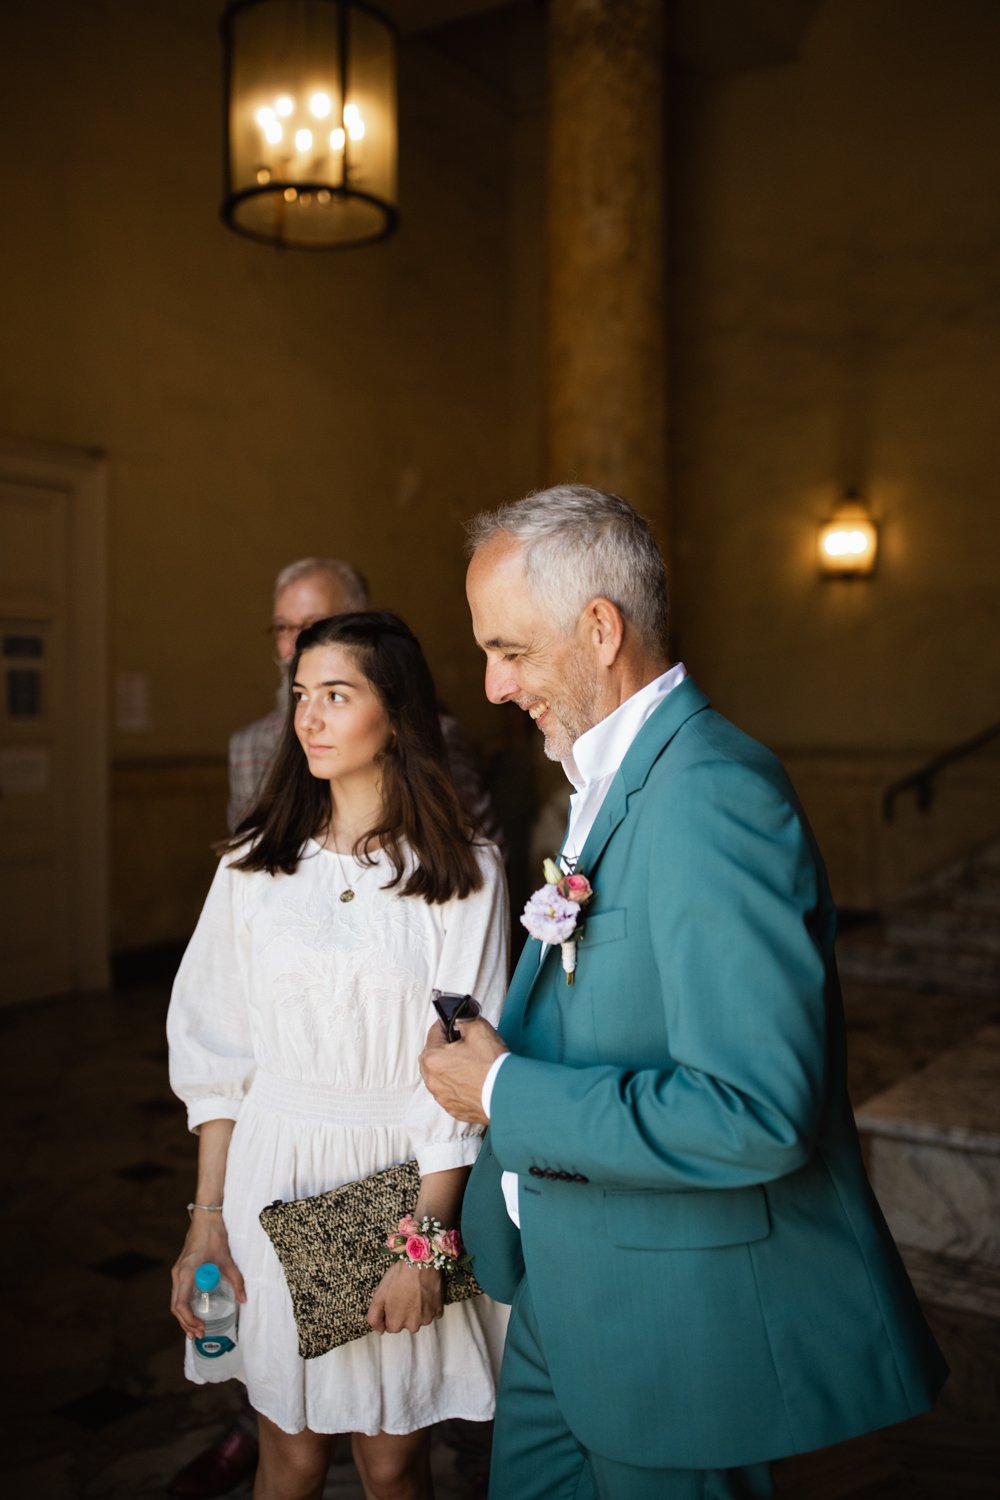 wedding marriage mariage photographe corse corsica ajaccio Krista Espino Anza Creative family photography mairee maire courthouse france french le maquis hotel-5.jpg